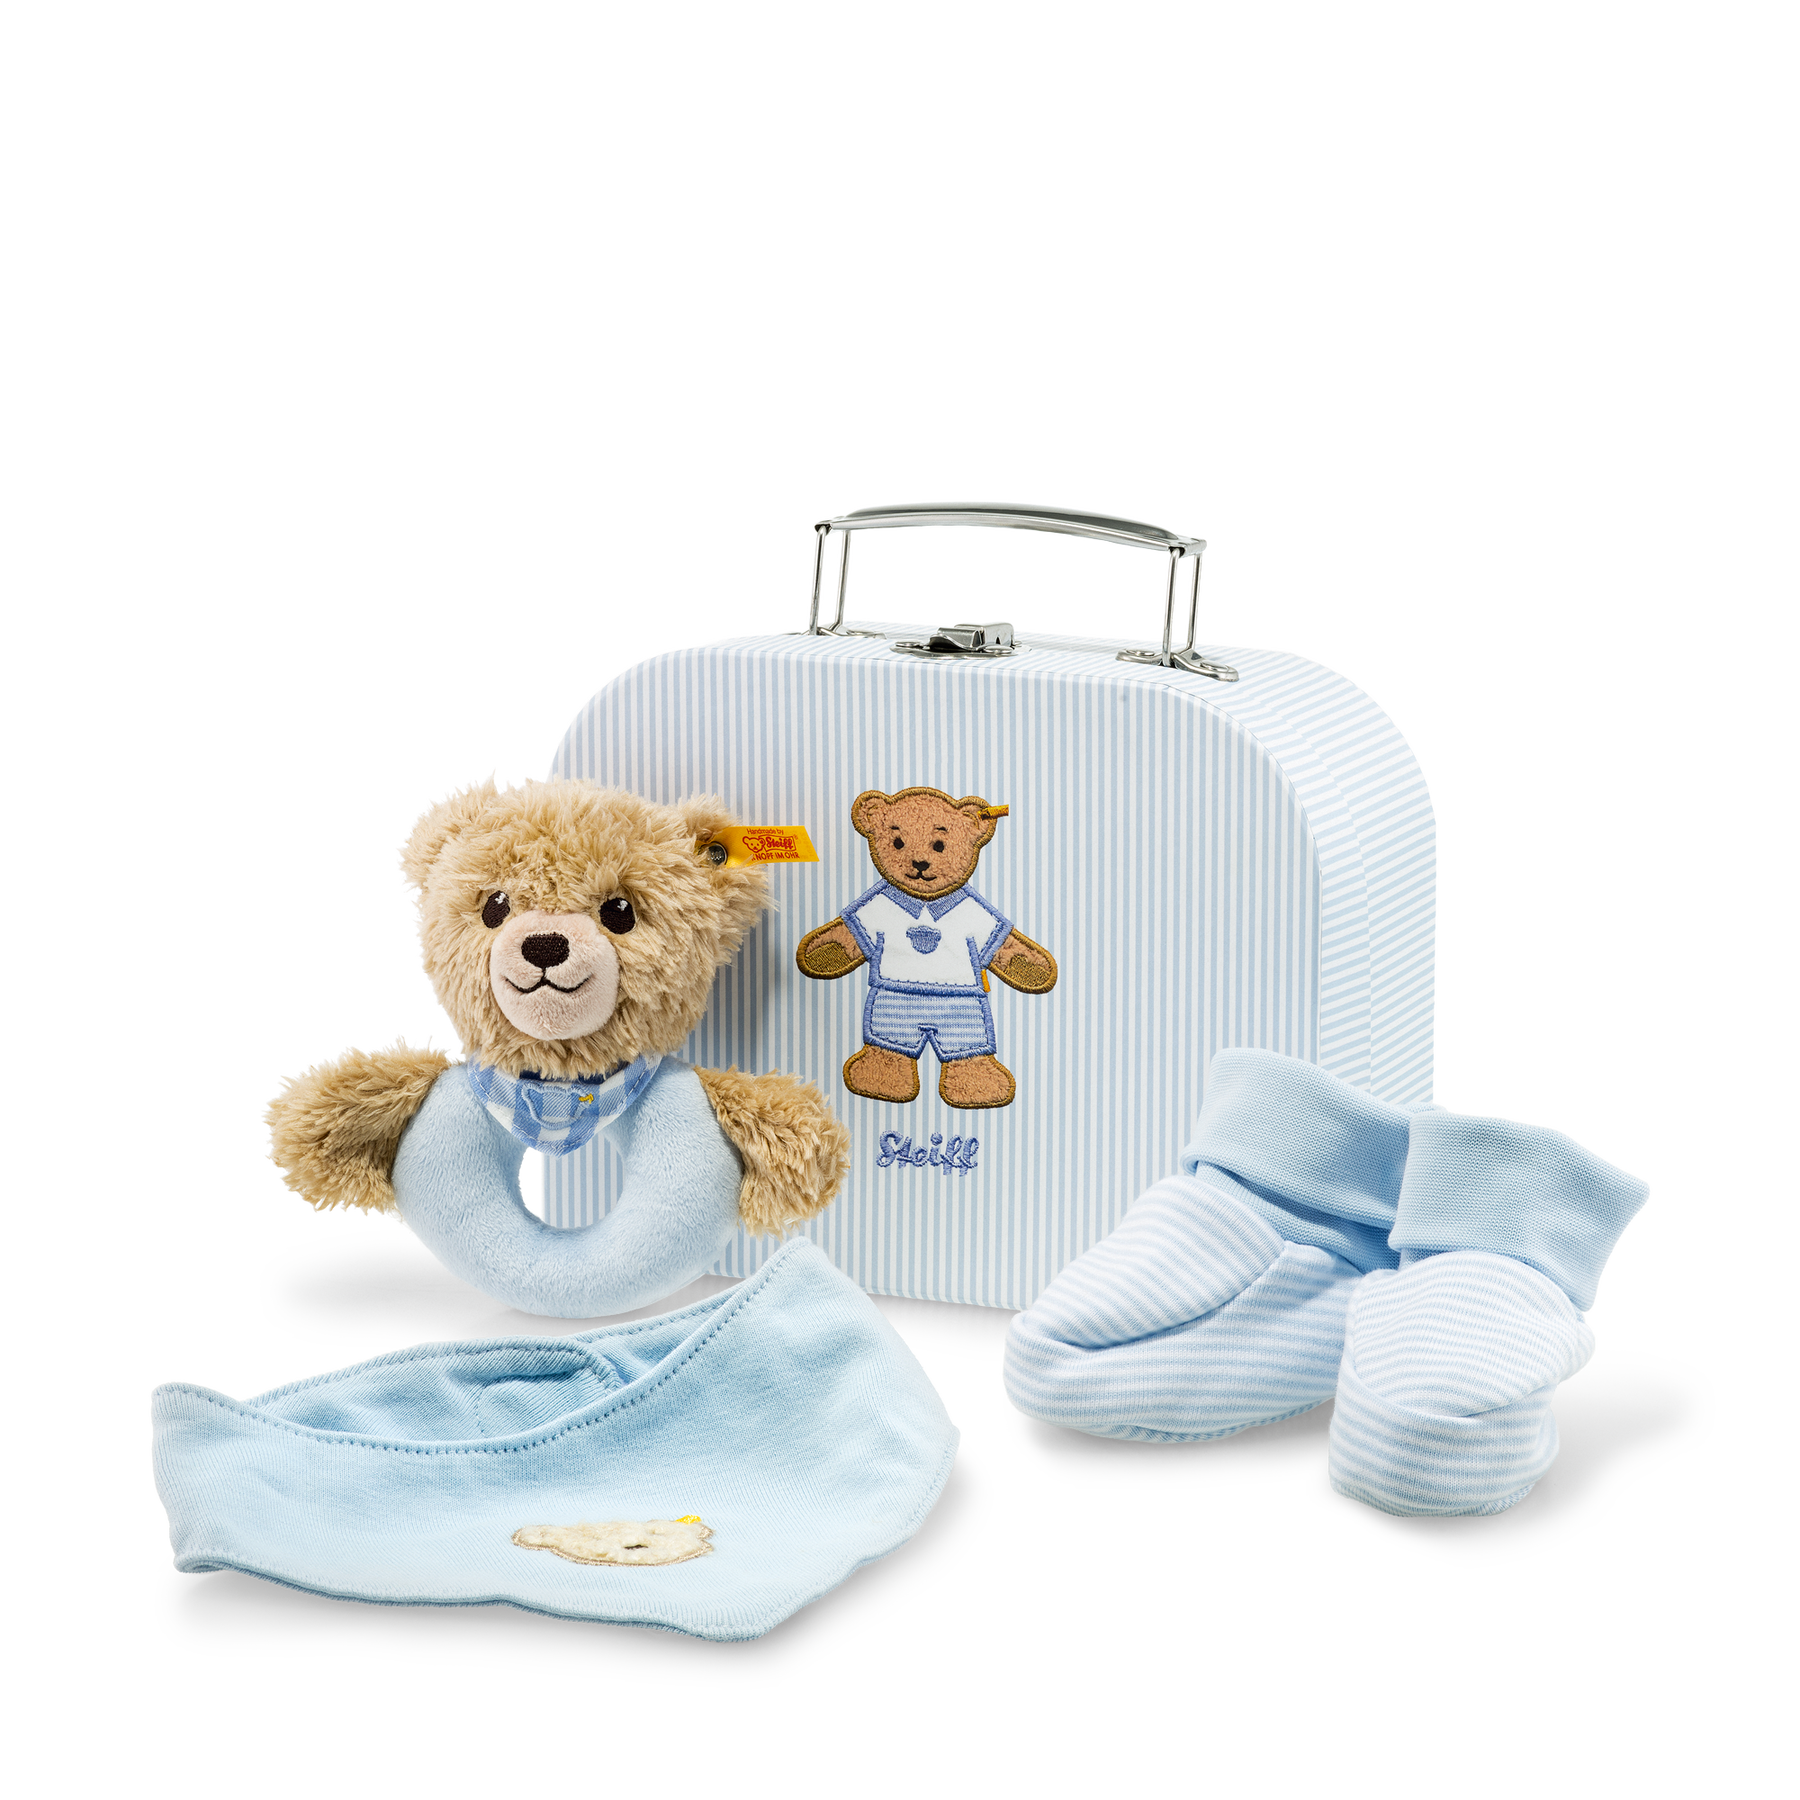 Sleep well bear grip toy with rattle gift set